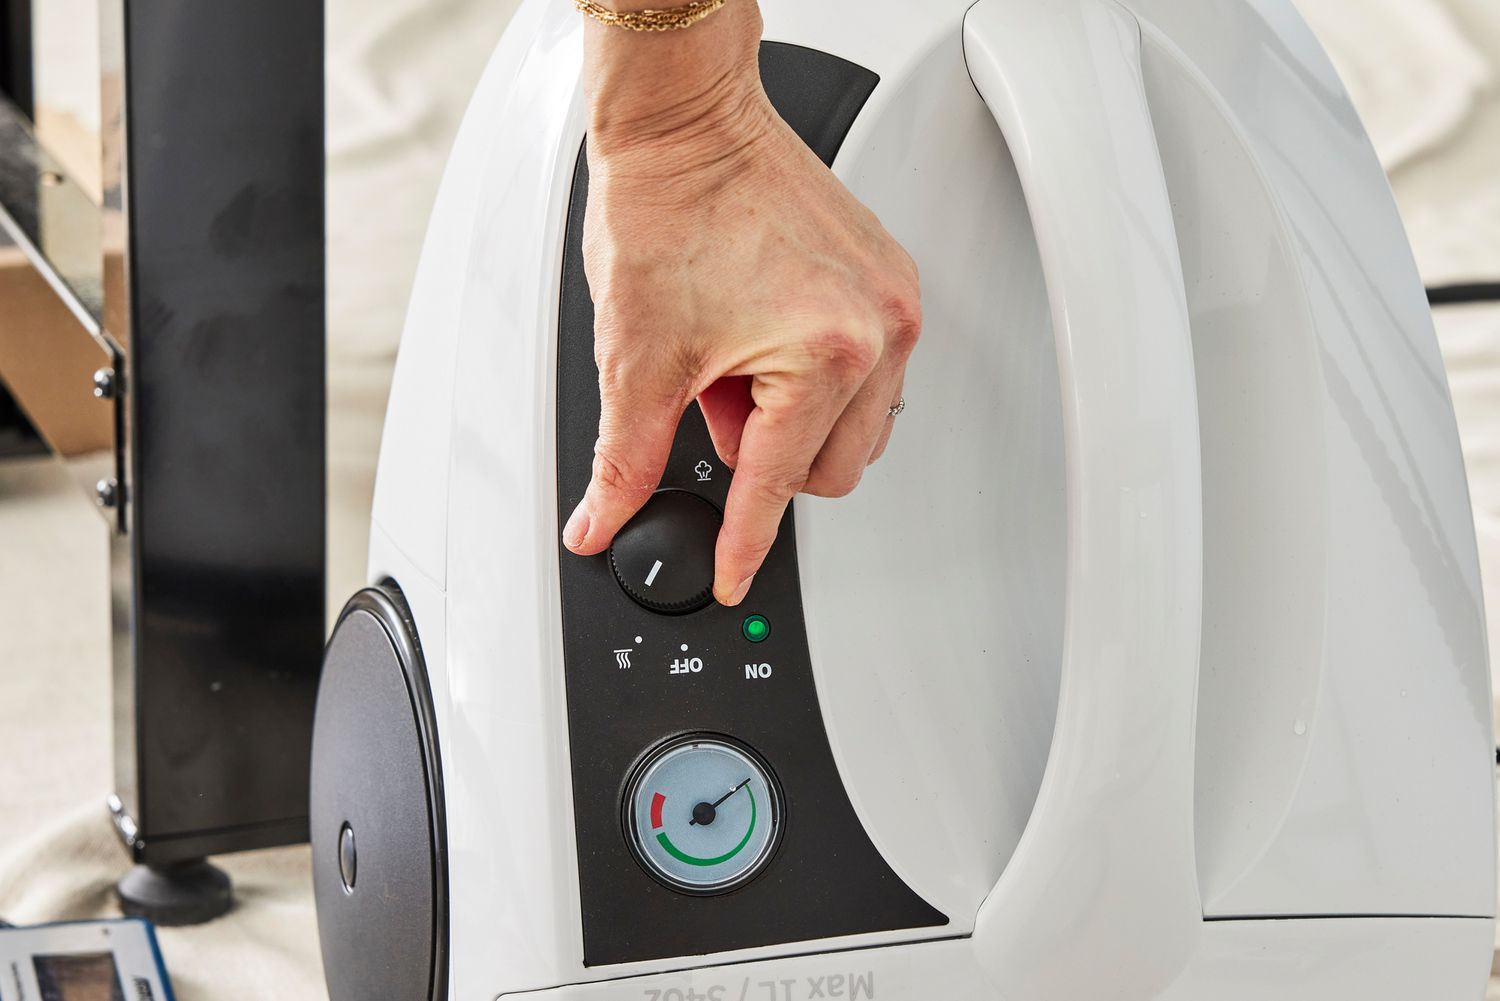 A hand adjusts a dial on the Dupray One Steam Cleaner